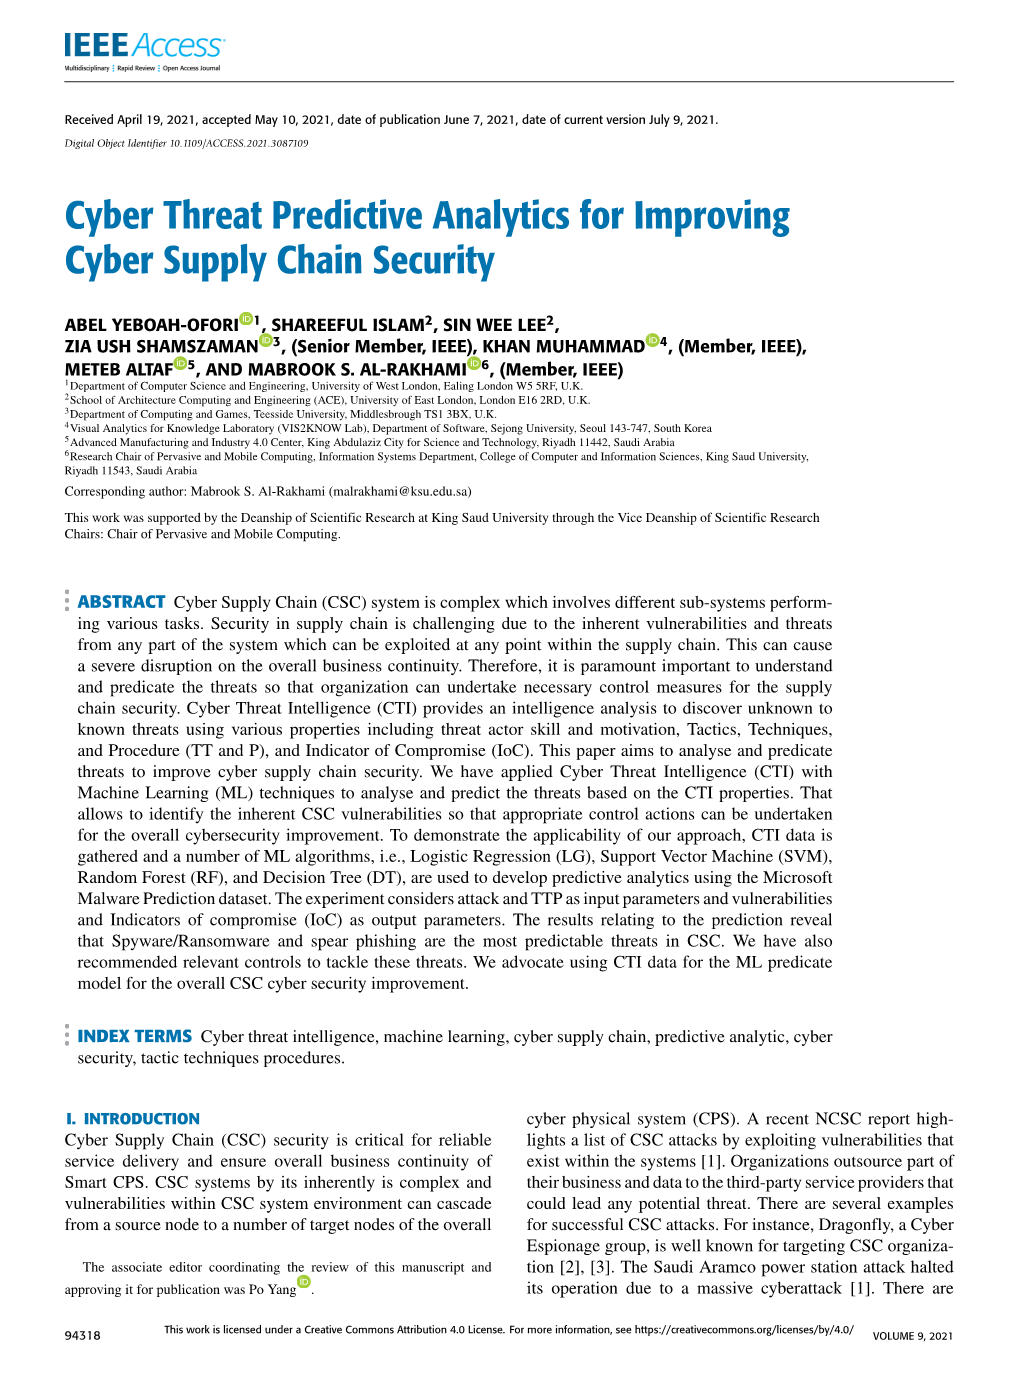 Cyber Threat Predictive Analytics for Improving Cyber Supply Chain Security